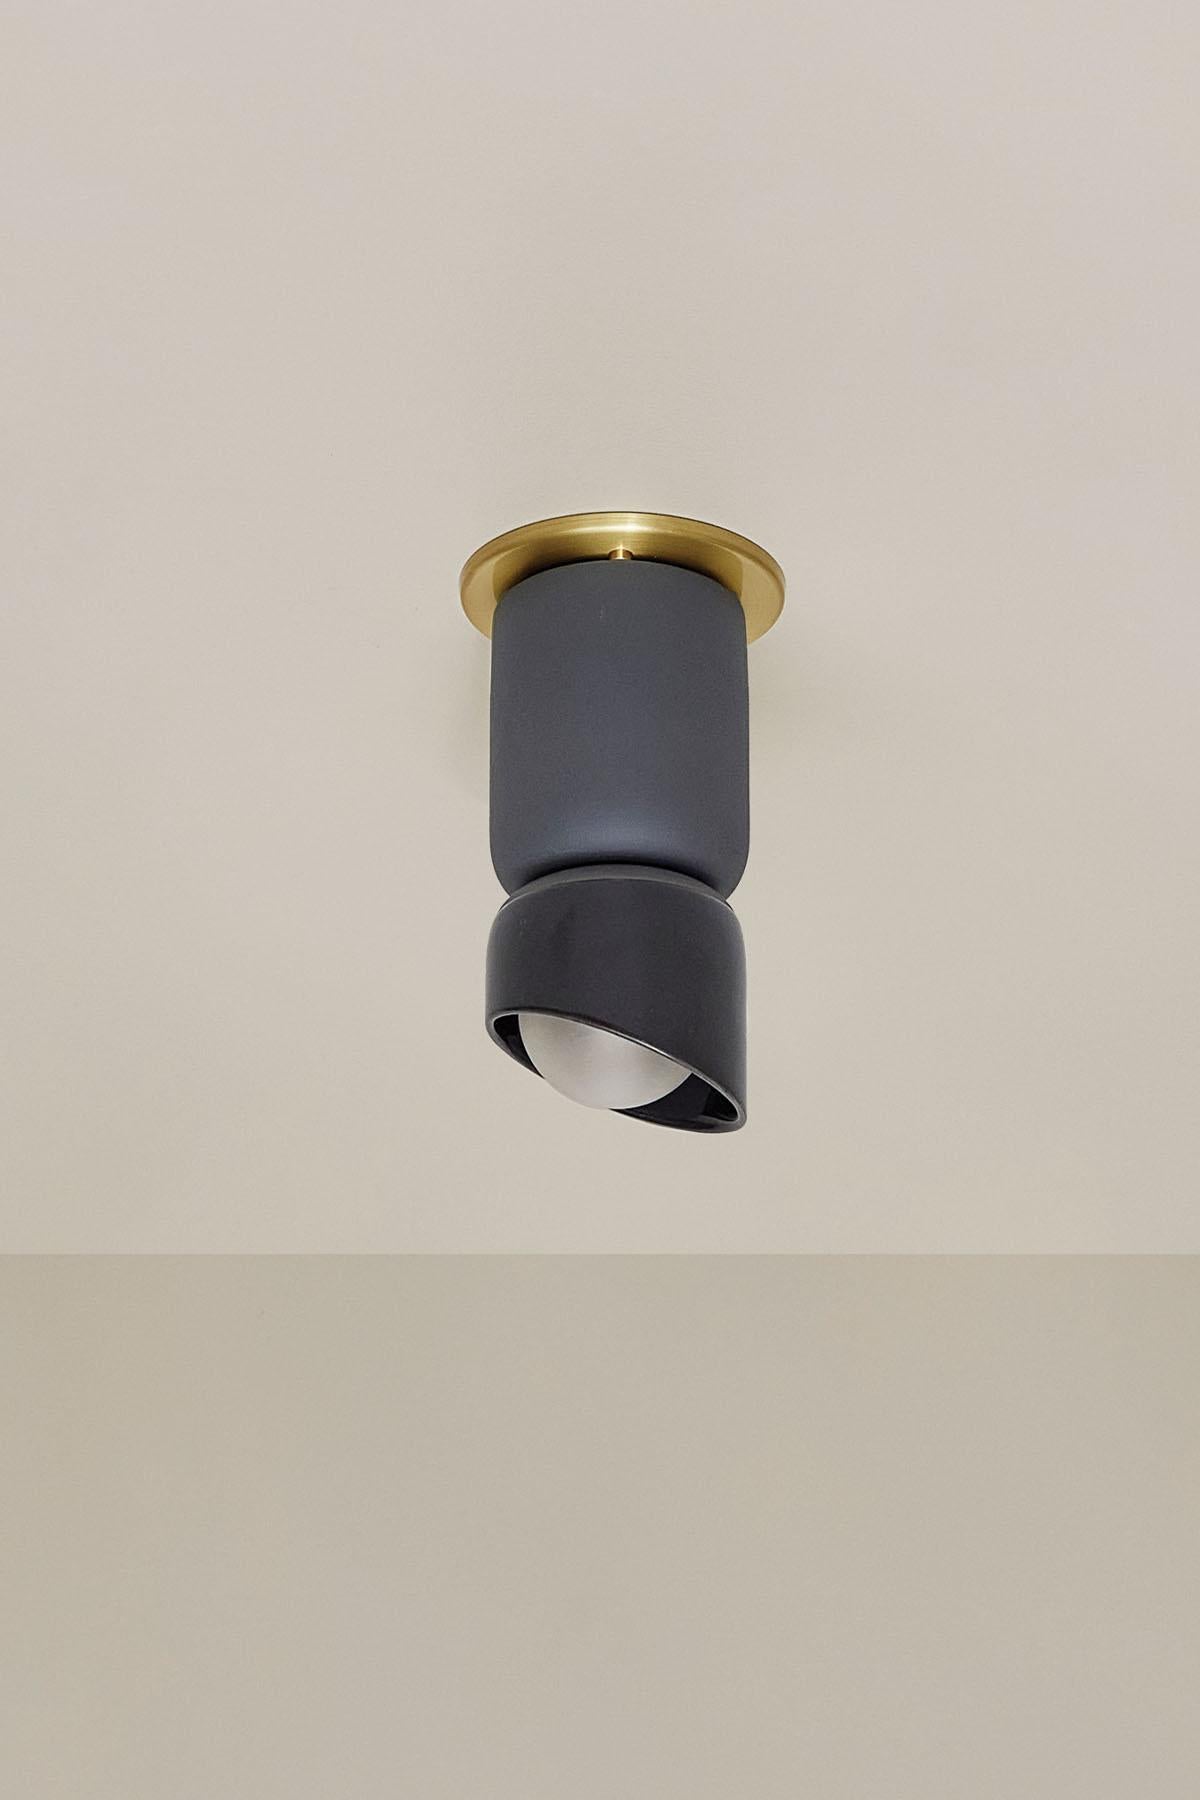 The Terra 1.5 Ceiling Light, Slim Base Adapter is a layered matte cylinder and glazed base which creates an asymmetric stack of ceramic forms with two contrasting finishes. Available in a choice of three natural tones – Slate, Sage, Vanilla Bean and